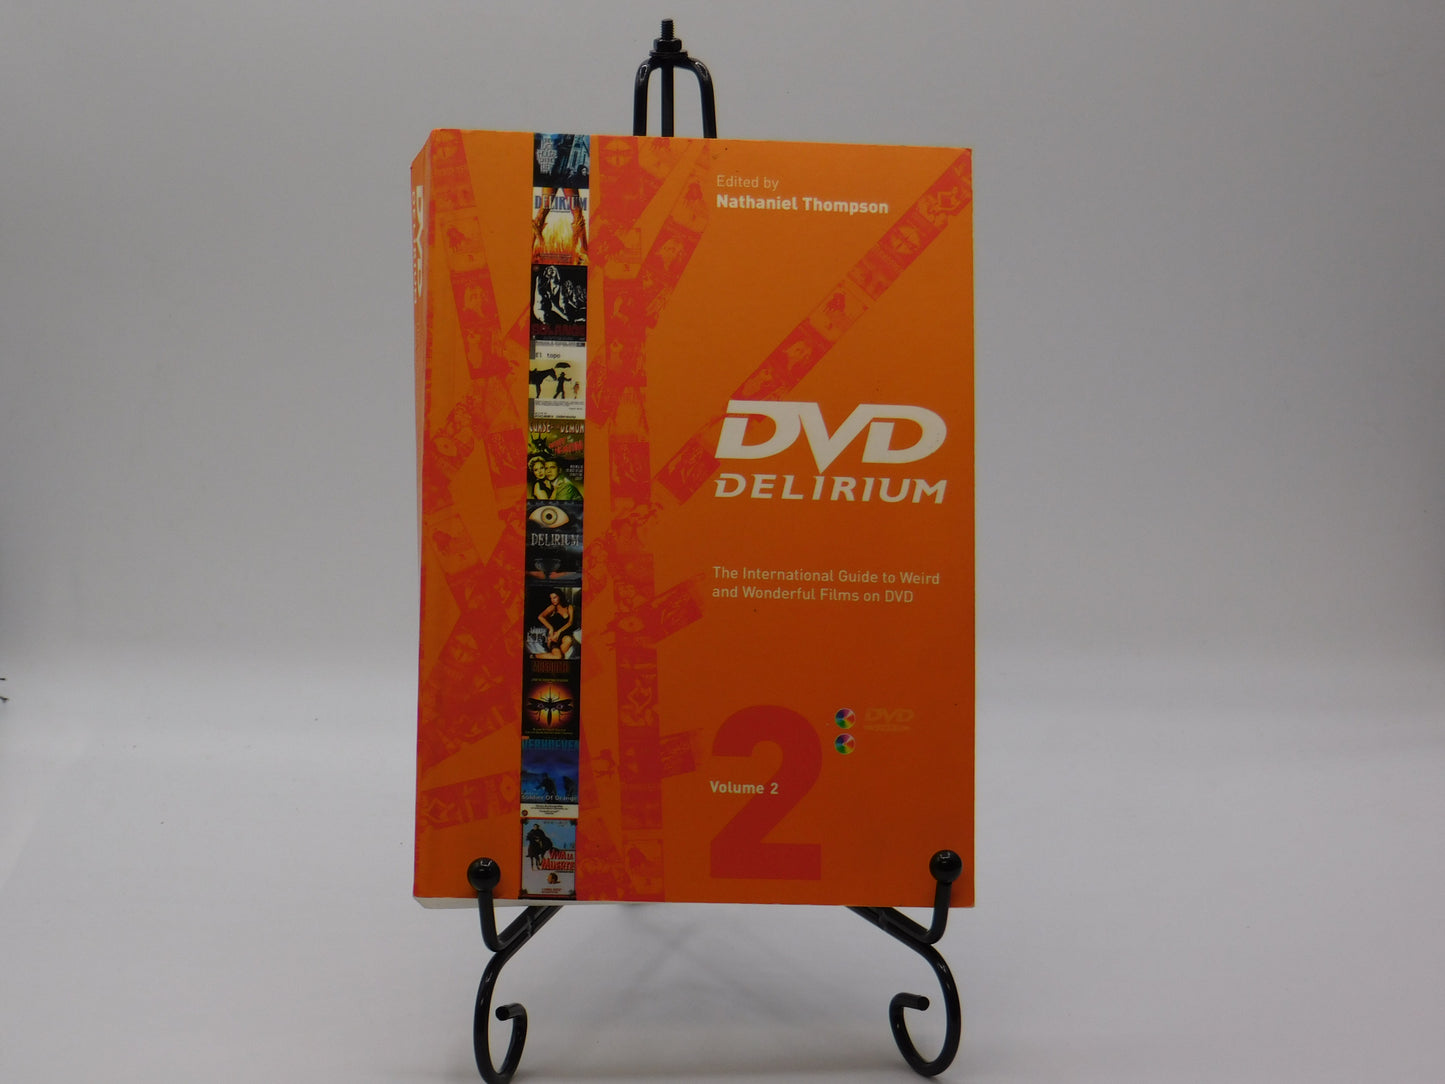 DVD Delirium Volume 2-The International Guide to Weird and Wonderful Films on DVD by Nathaniel Thompson